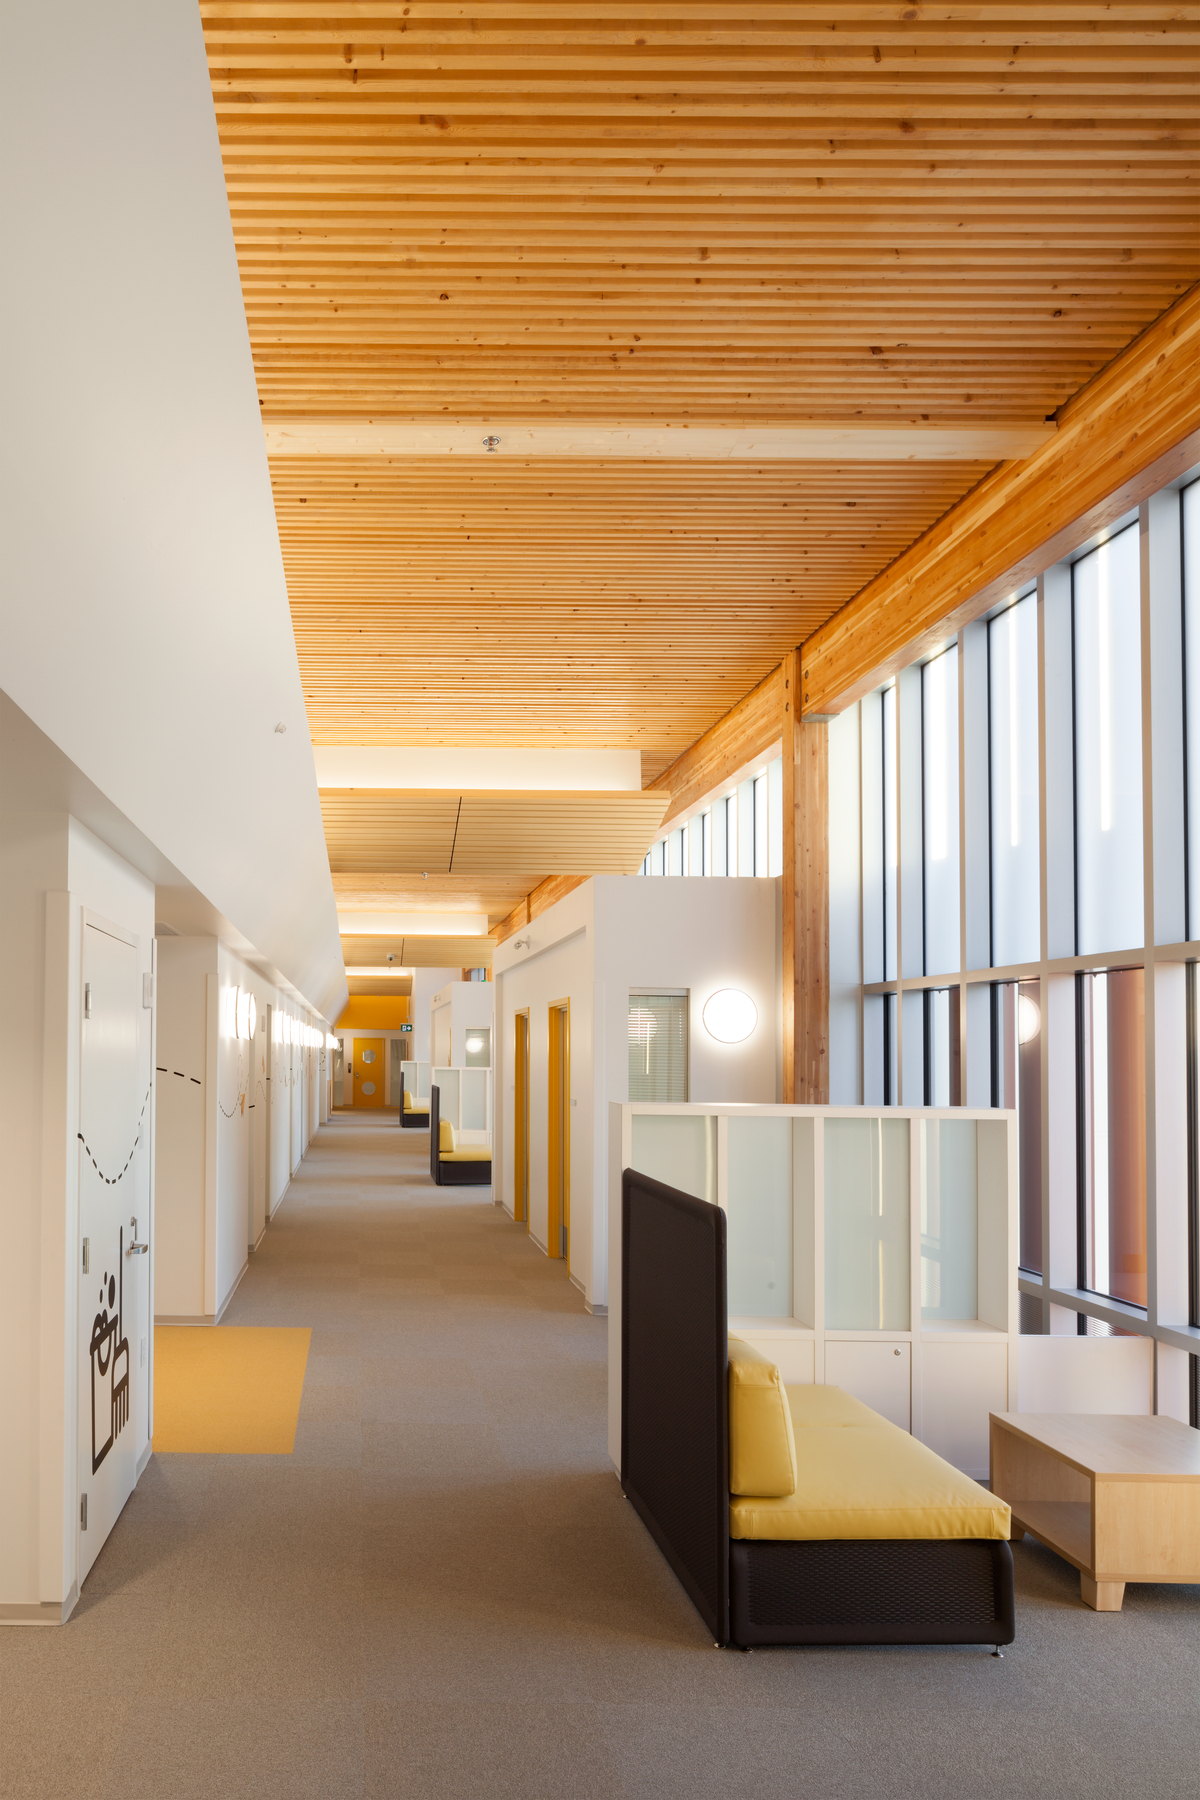 Bright sunny interior view of Pacific Autism Family Centre main hallway, showing exterior glass windows, and interior wood which includes glue-laminated timber (glulam) beams and columns, wood cabinets, wood trim, and dimensional lumber ceiling above